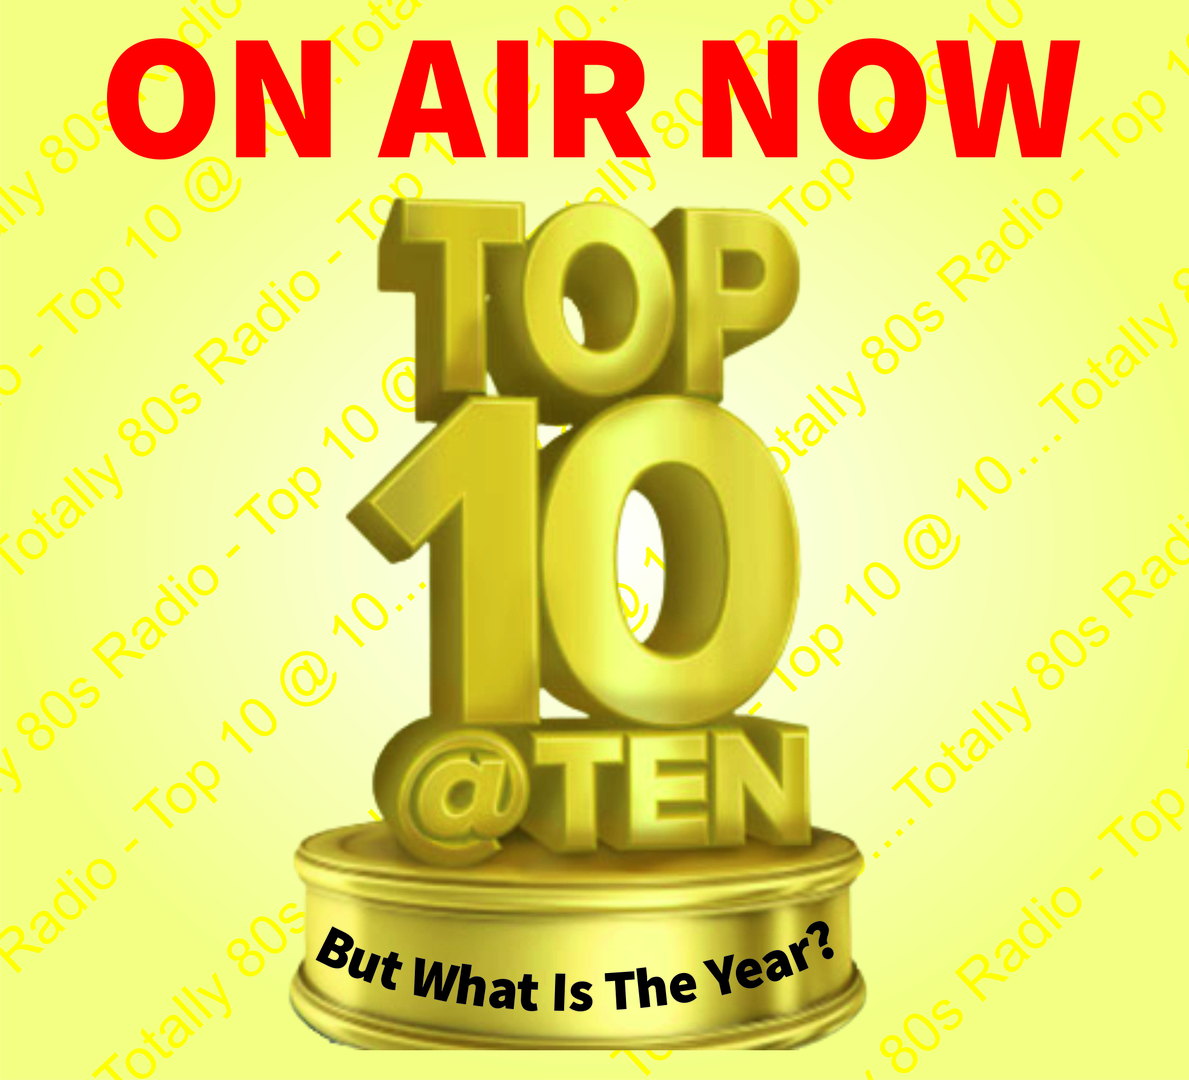 ON AIR now it's the Top 10 at 10, but what is the year? Listen on totally80sradio.co.uk or at radio garden on ift.tt/fbq6WoO